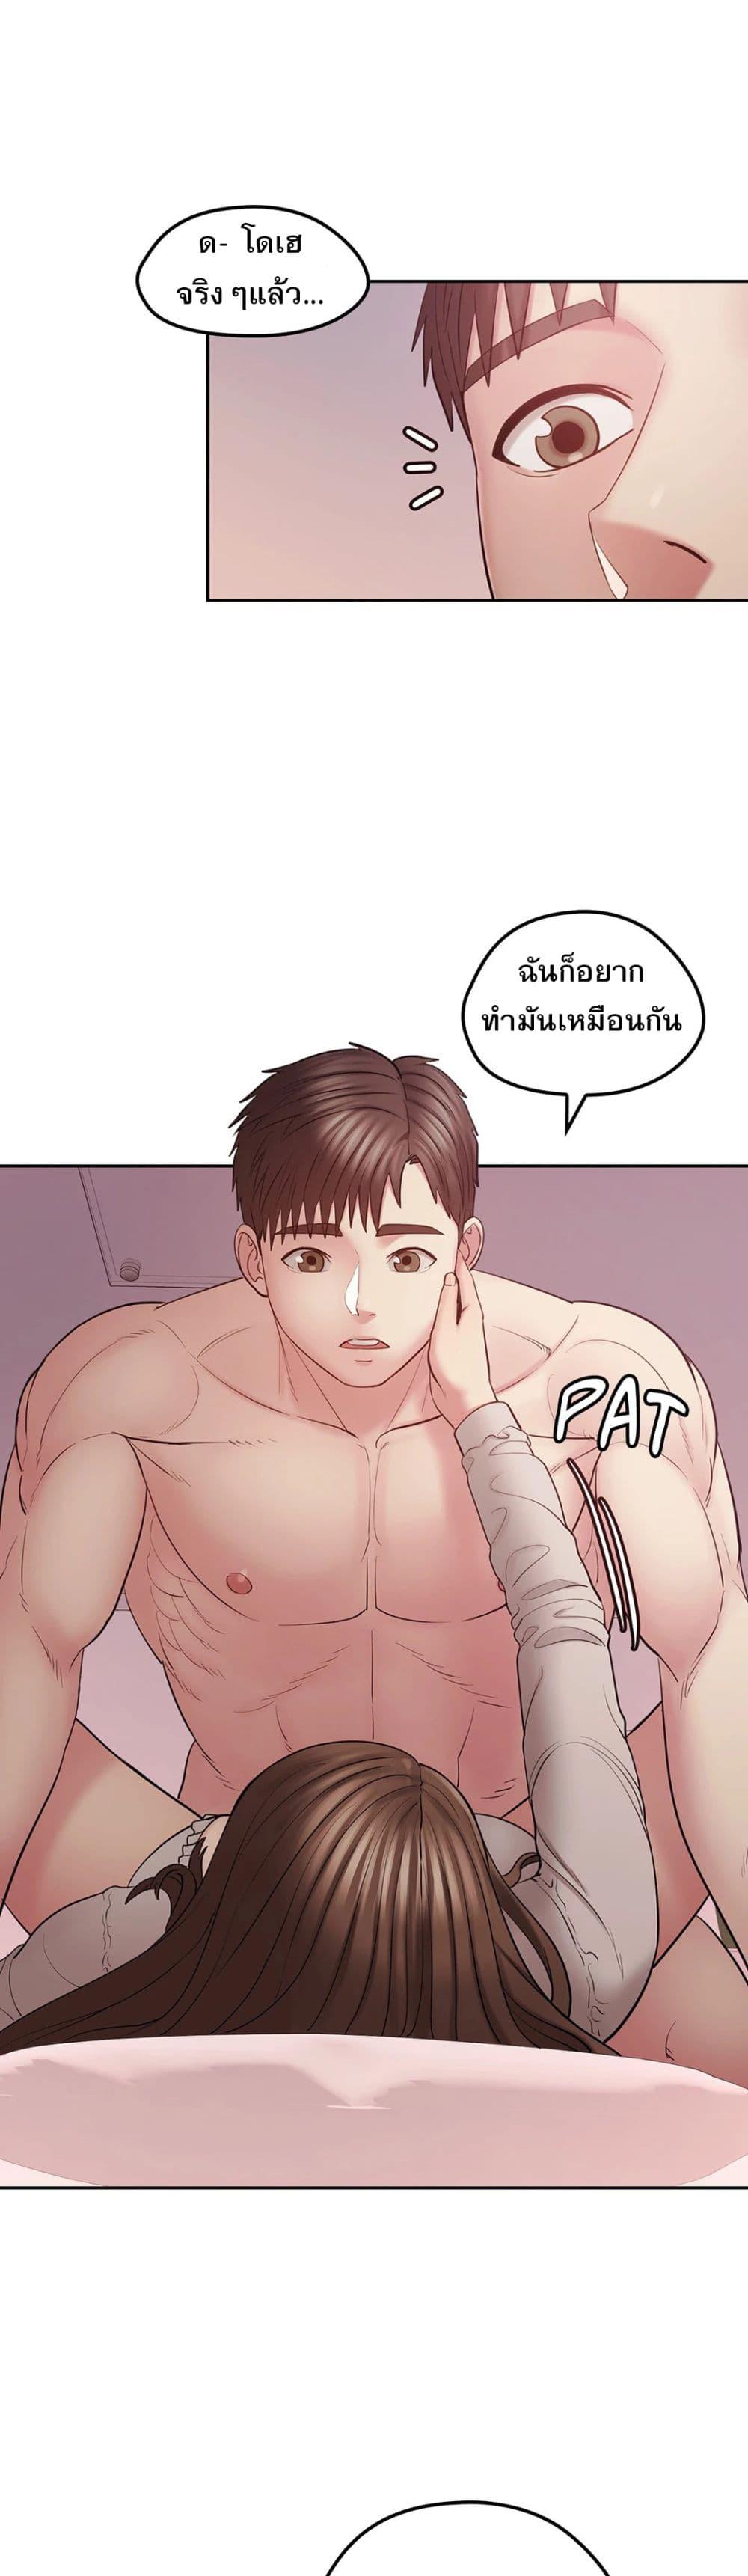 Sexual Consulting 1 ภาพ 38